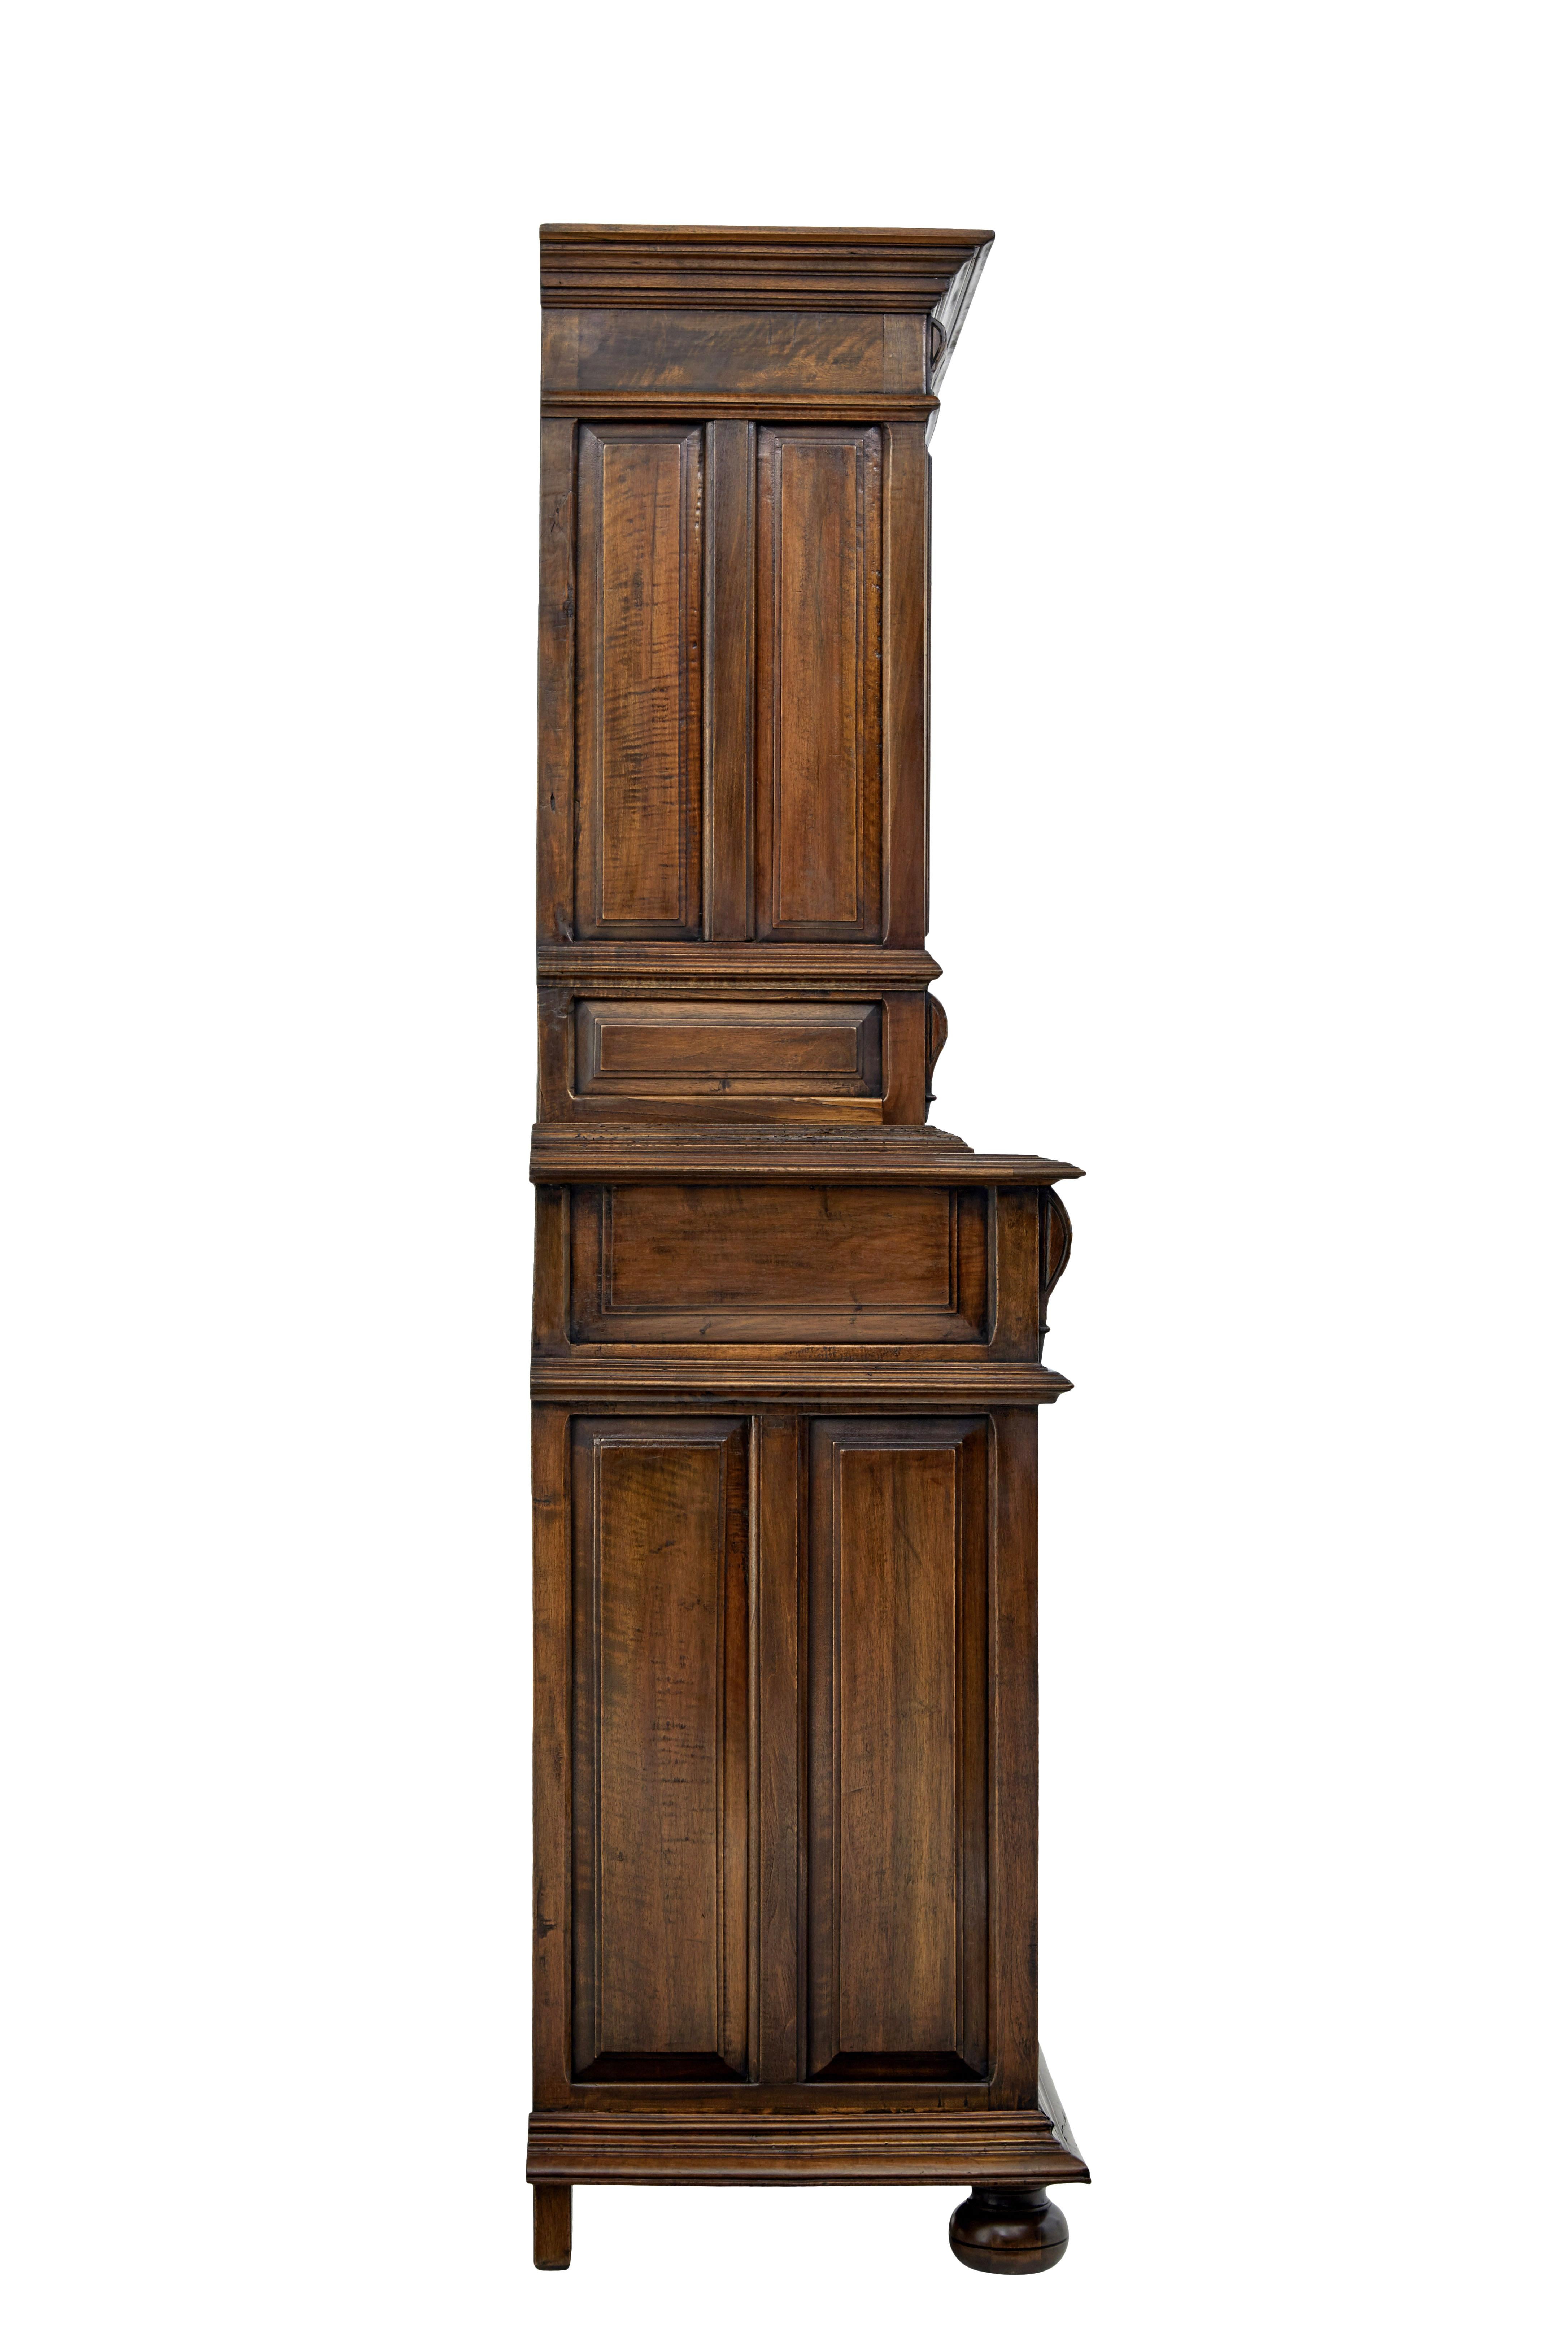 Hand-Carved Mid 19th Century Carved Walnut Italian Cabinet